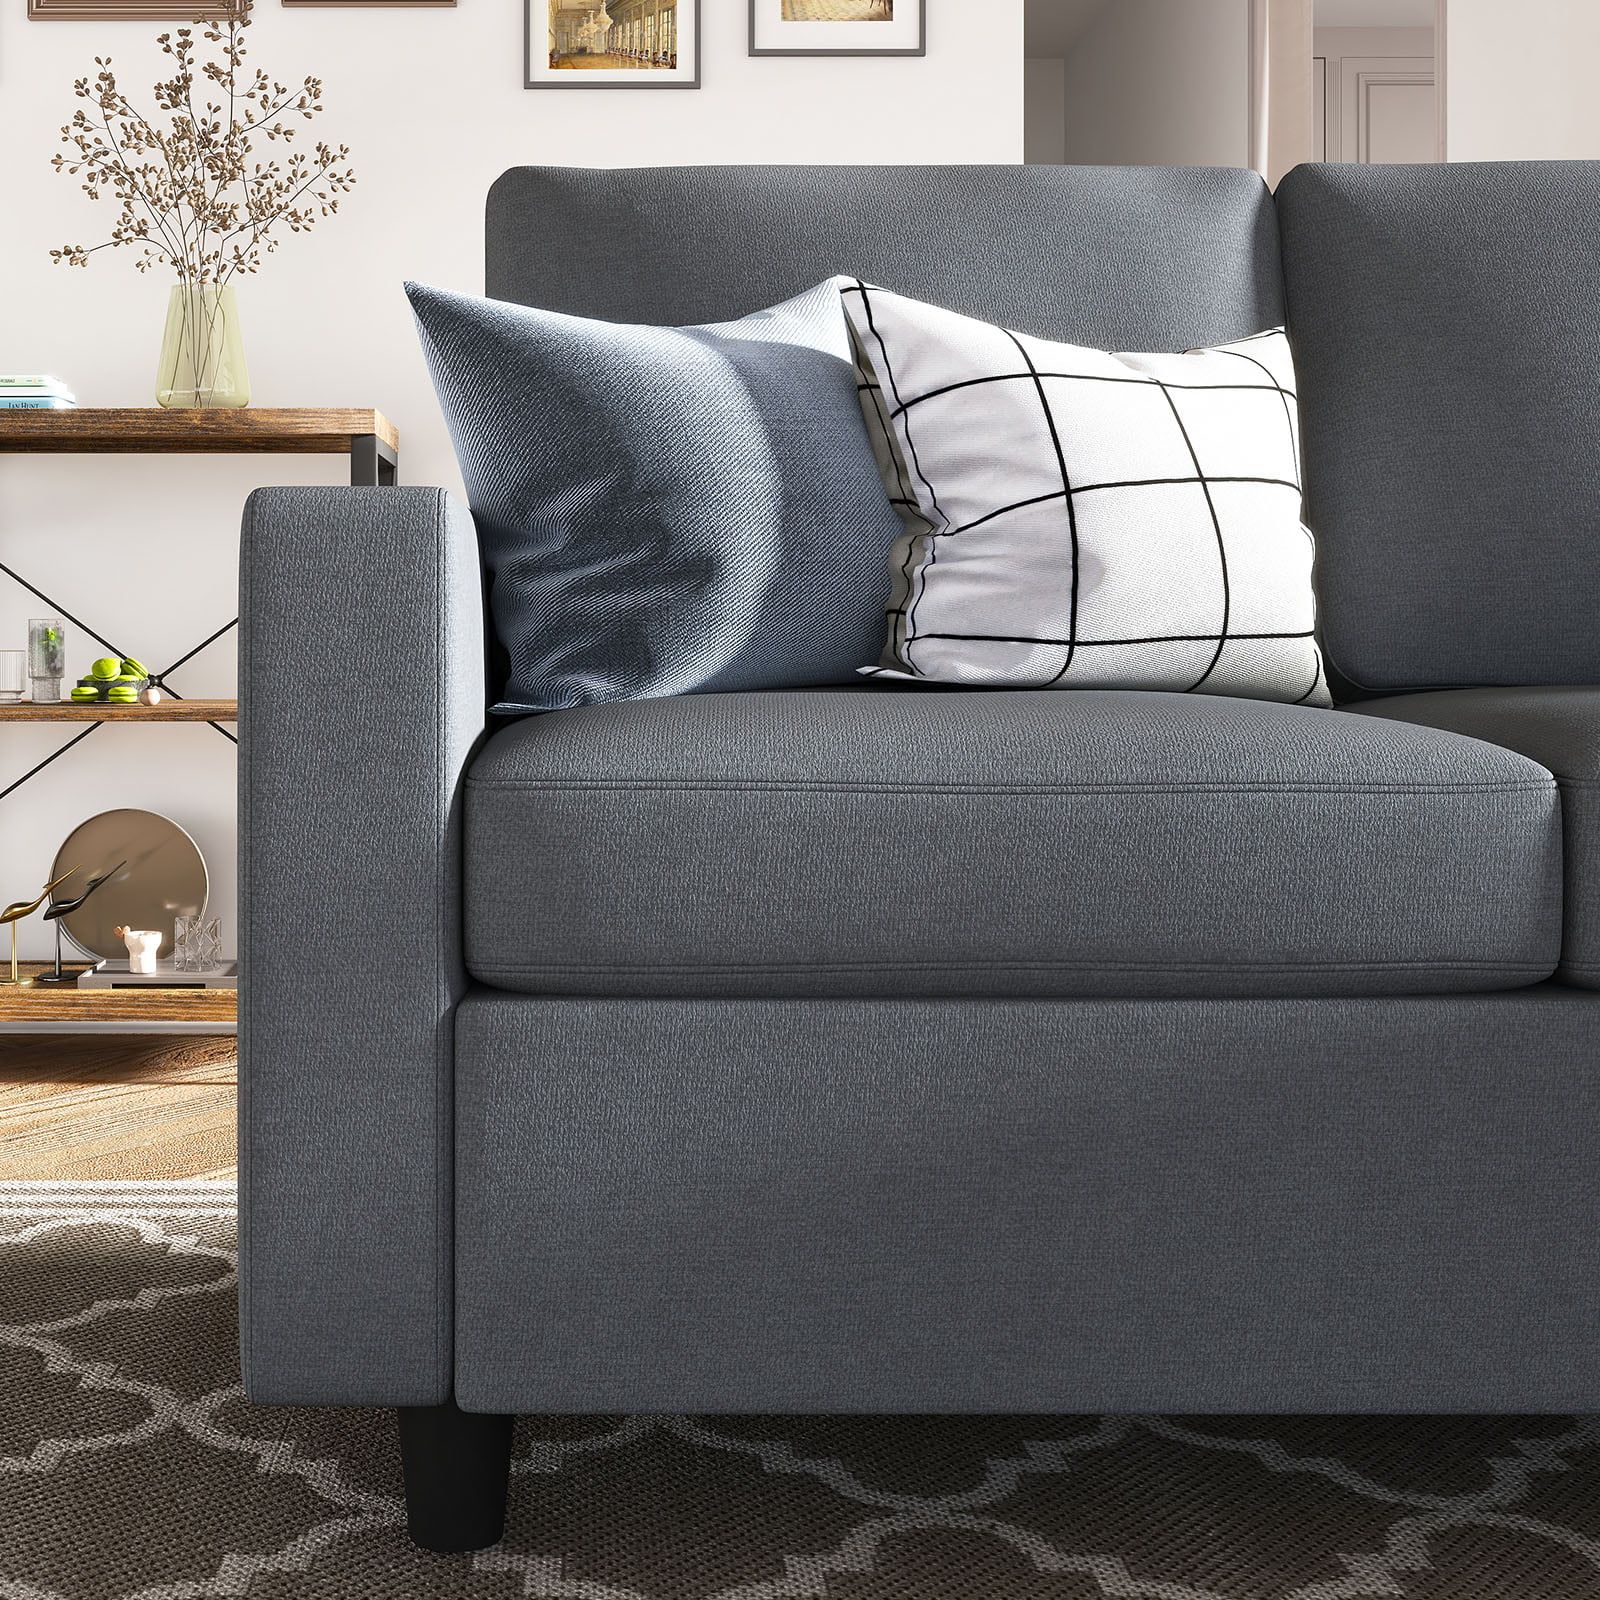 Honbay Reversible Sectional Apartment Sofa L Shaped Couch For Living Room,  Bluish Gray – Walmart With Regard To L Shapped Apartment Sofas (View 19 of 20)